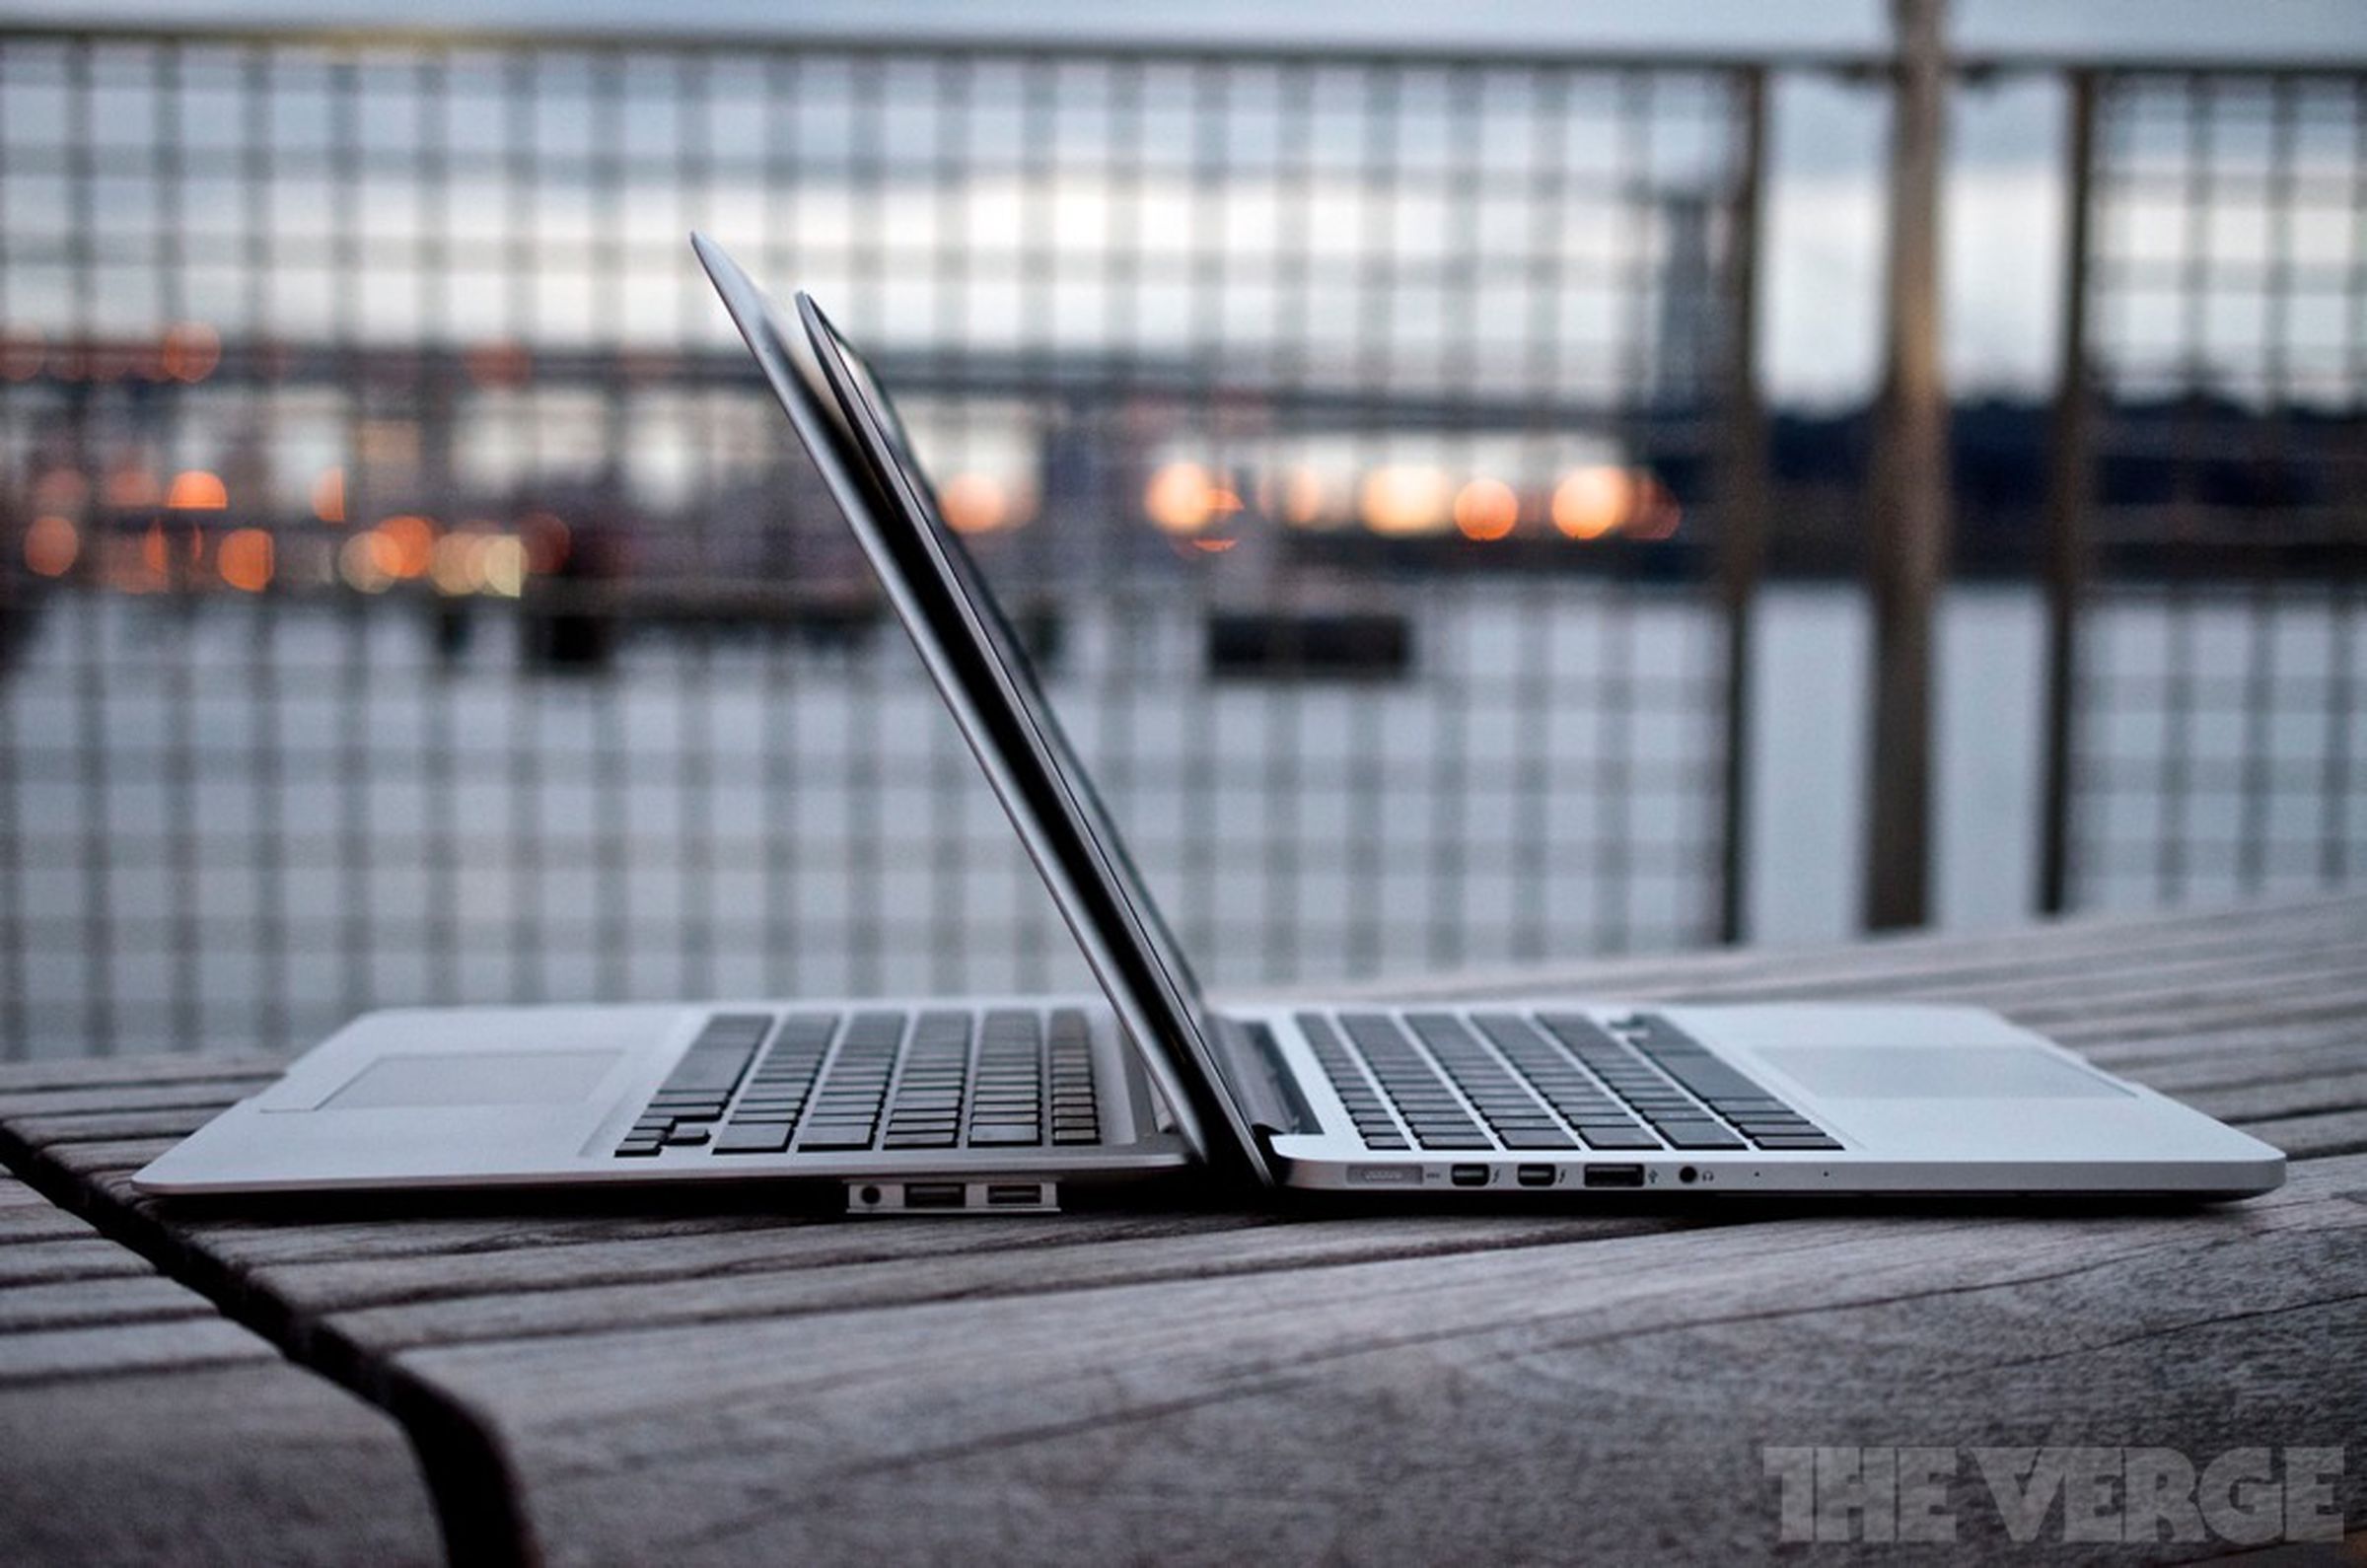 Photos of the 13-inch MacBook Pro with Retina Display